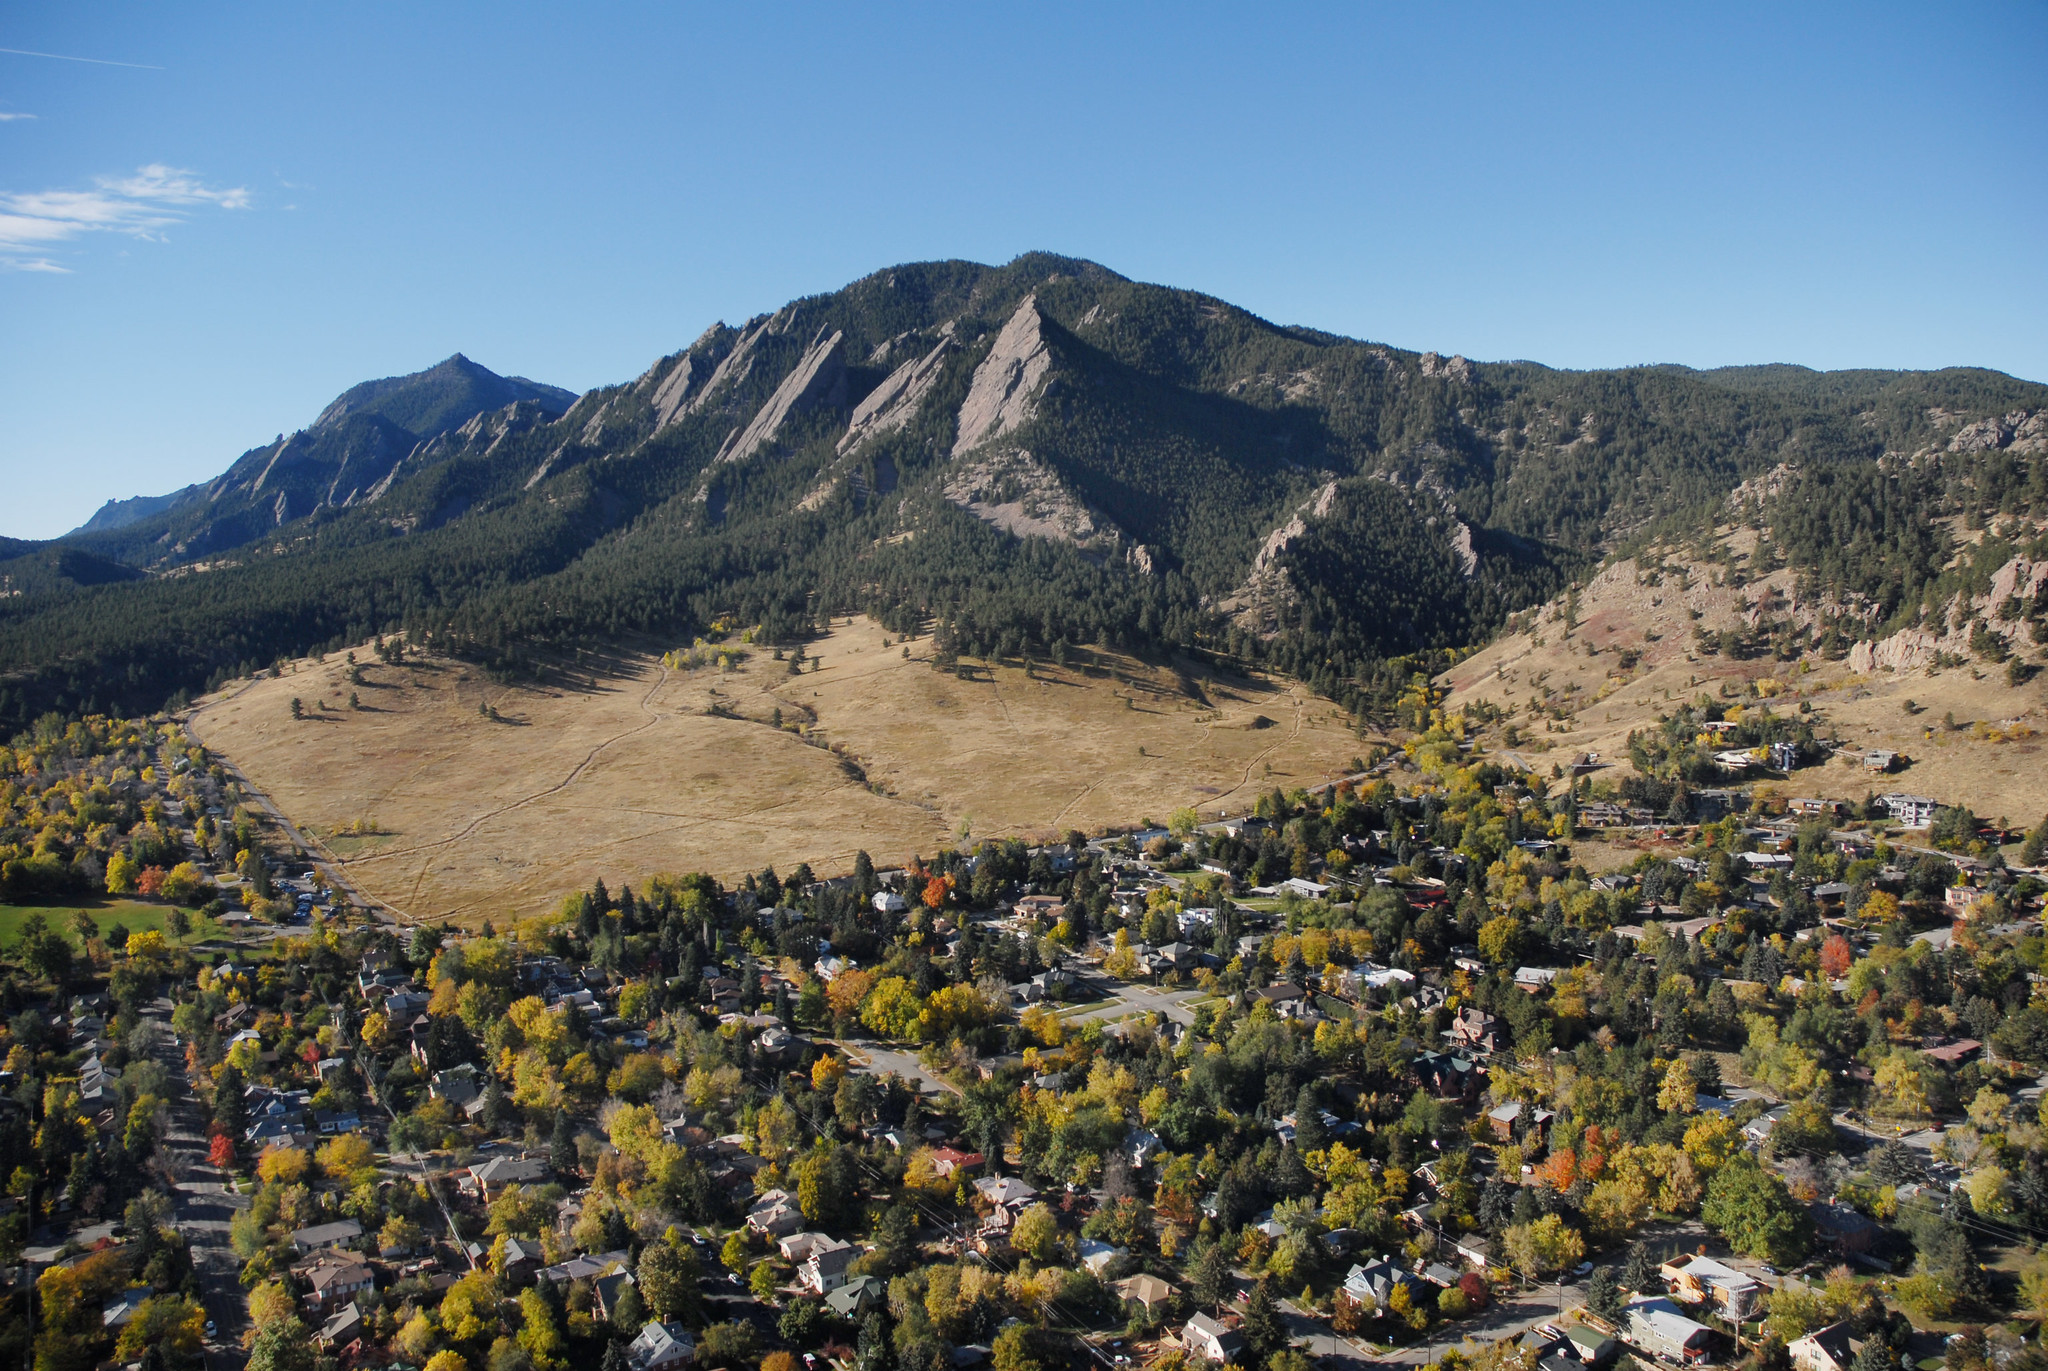 From the opinion panel: Make the most of Boulder’s limited land